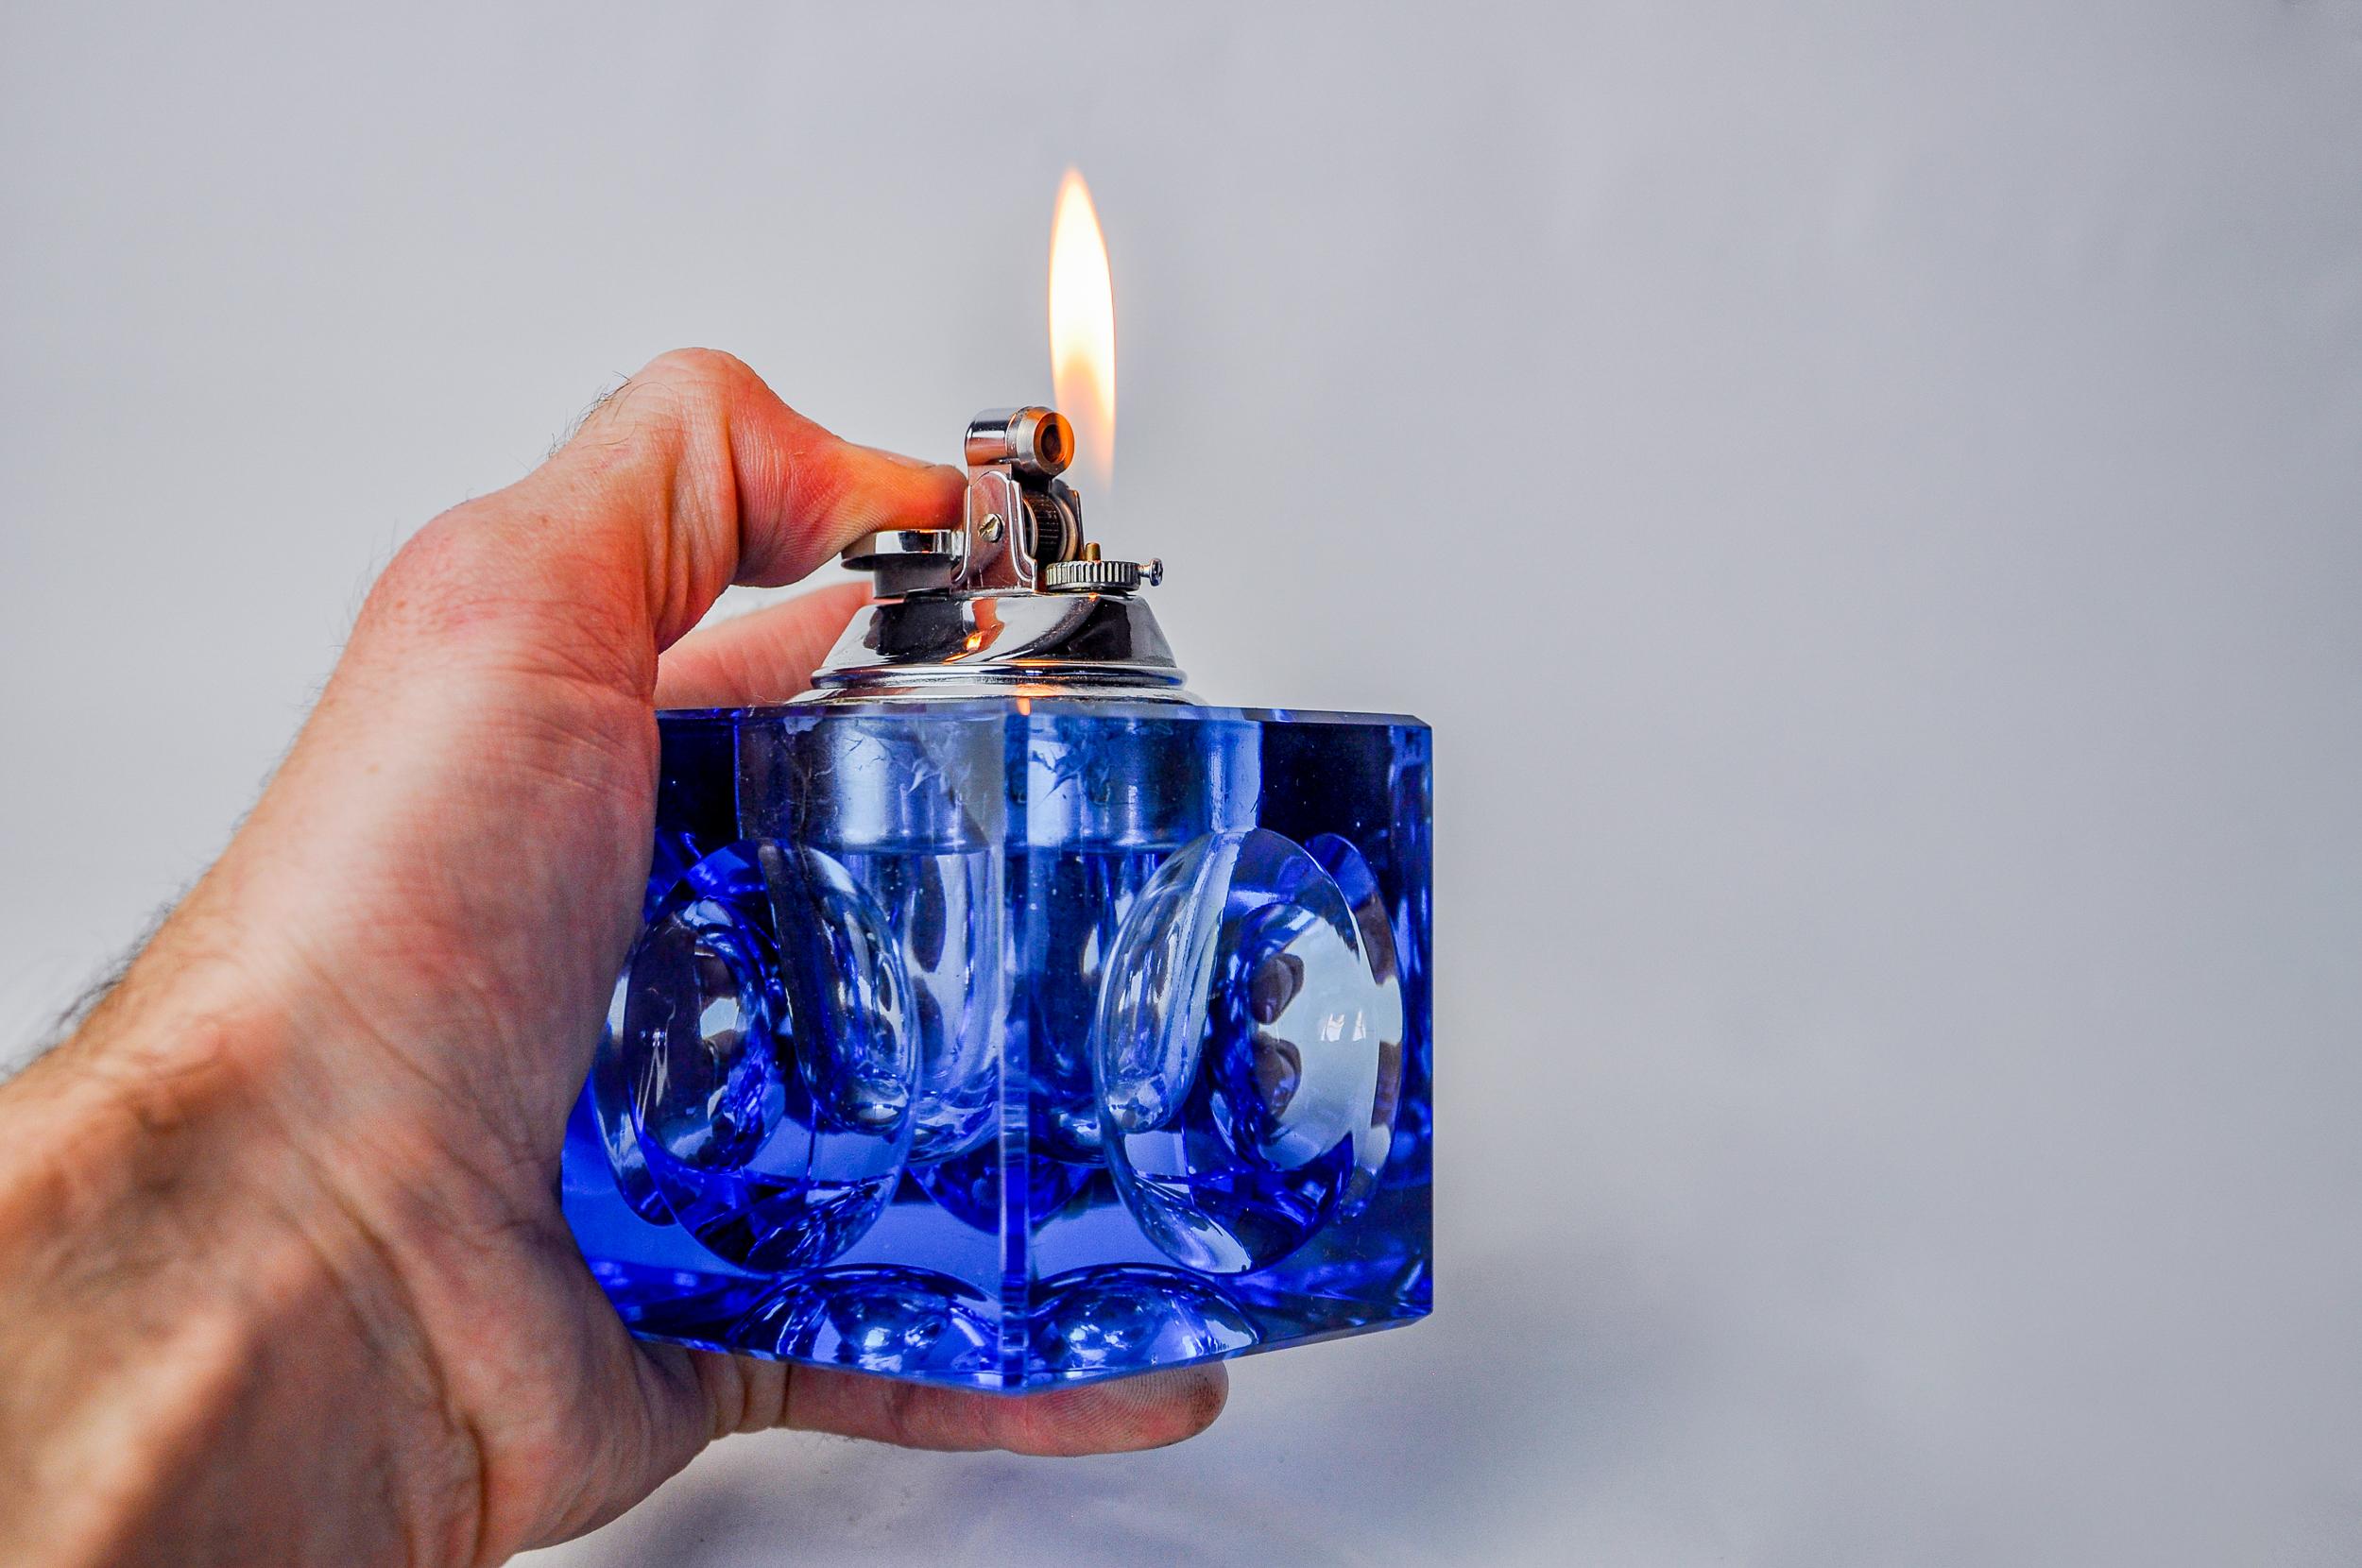 Superb ice lighter designed and produced by antonio imperatore in italy in the 1970s. Blue murano glass lighter with a magnifying effect on its facets, handcrafted by venetian master glassmakers. Decorative object that will bring a real design touch